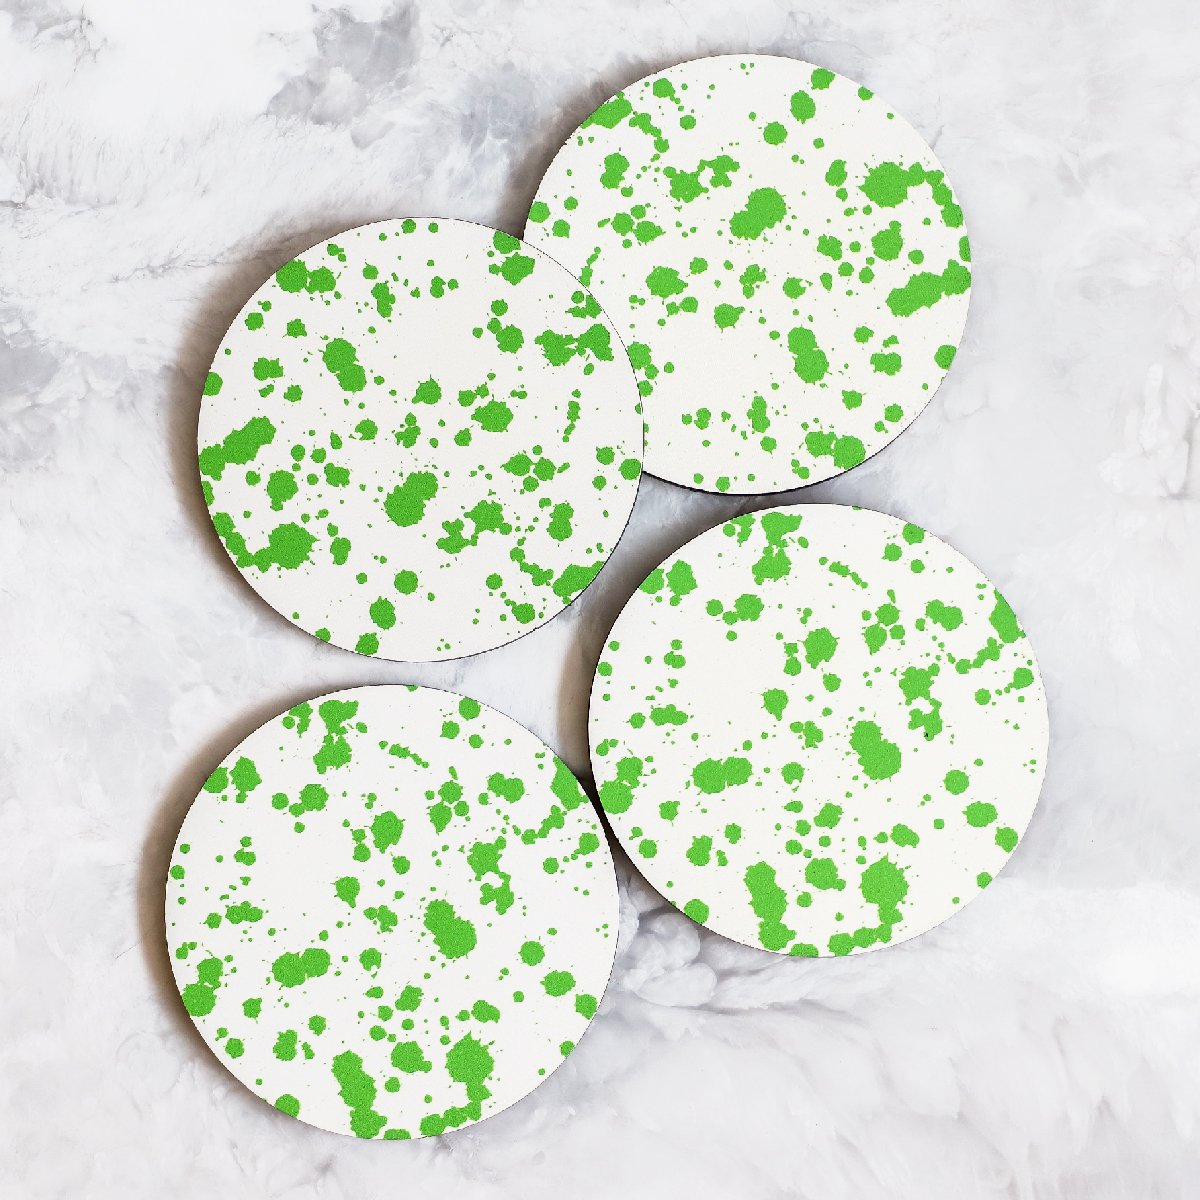 Printed Coasters with Splatter pattern in green made of cork and wood by Tisch New York